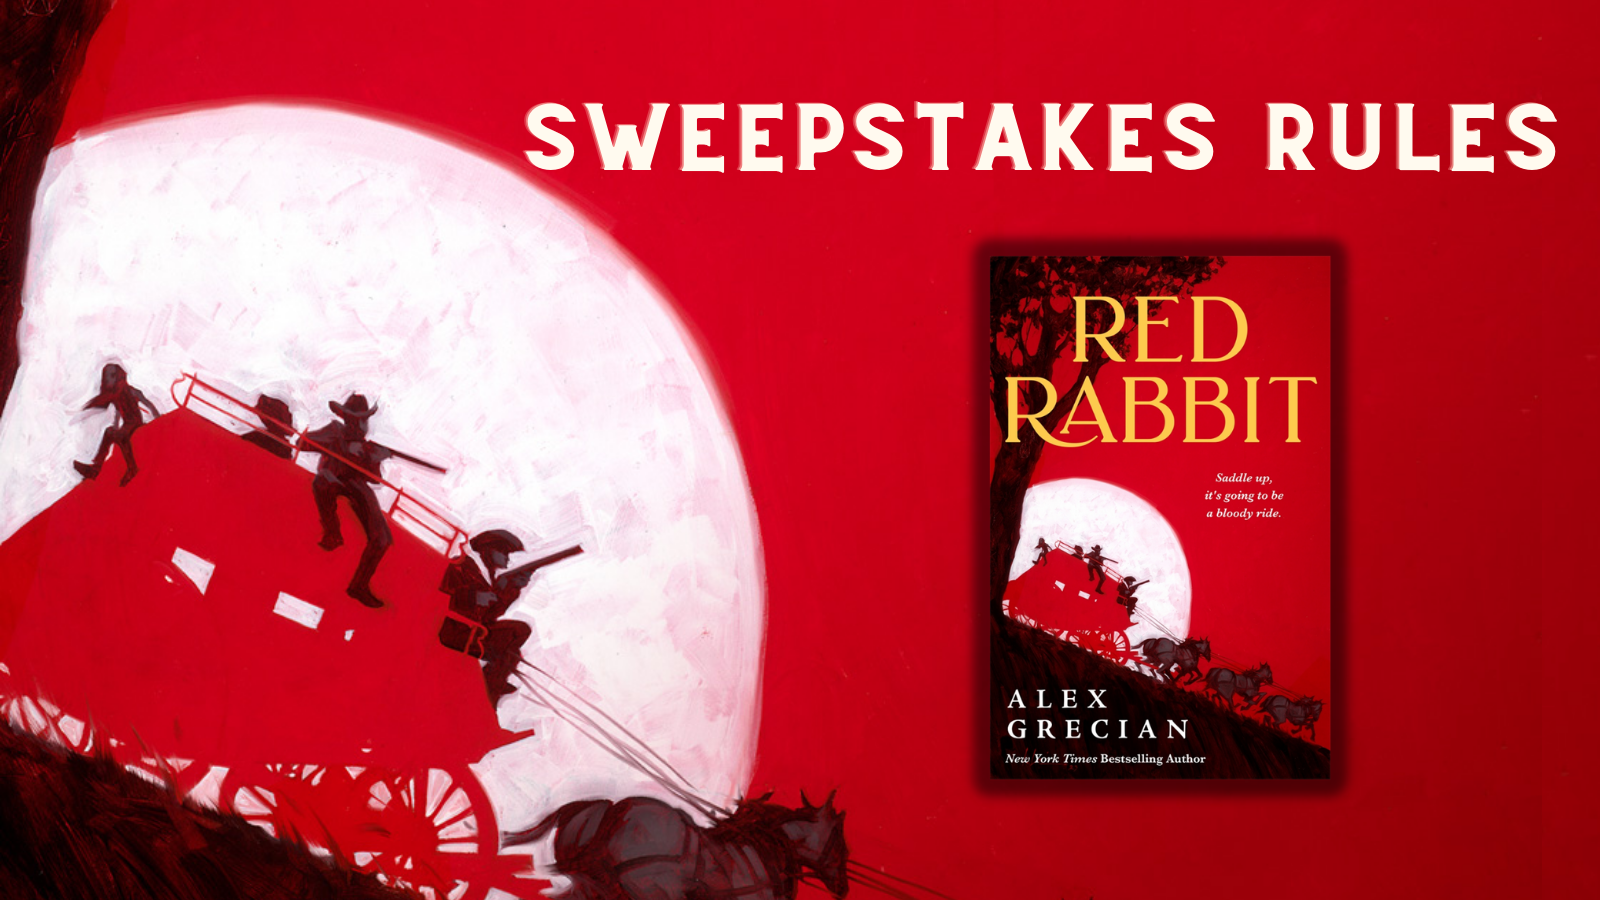 Red Rabbit Sweepstakes Rules - 944